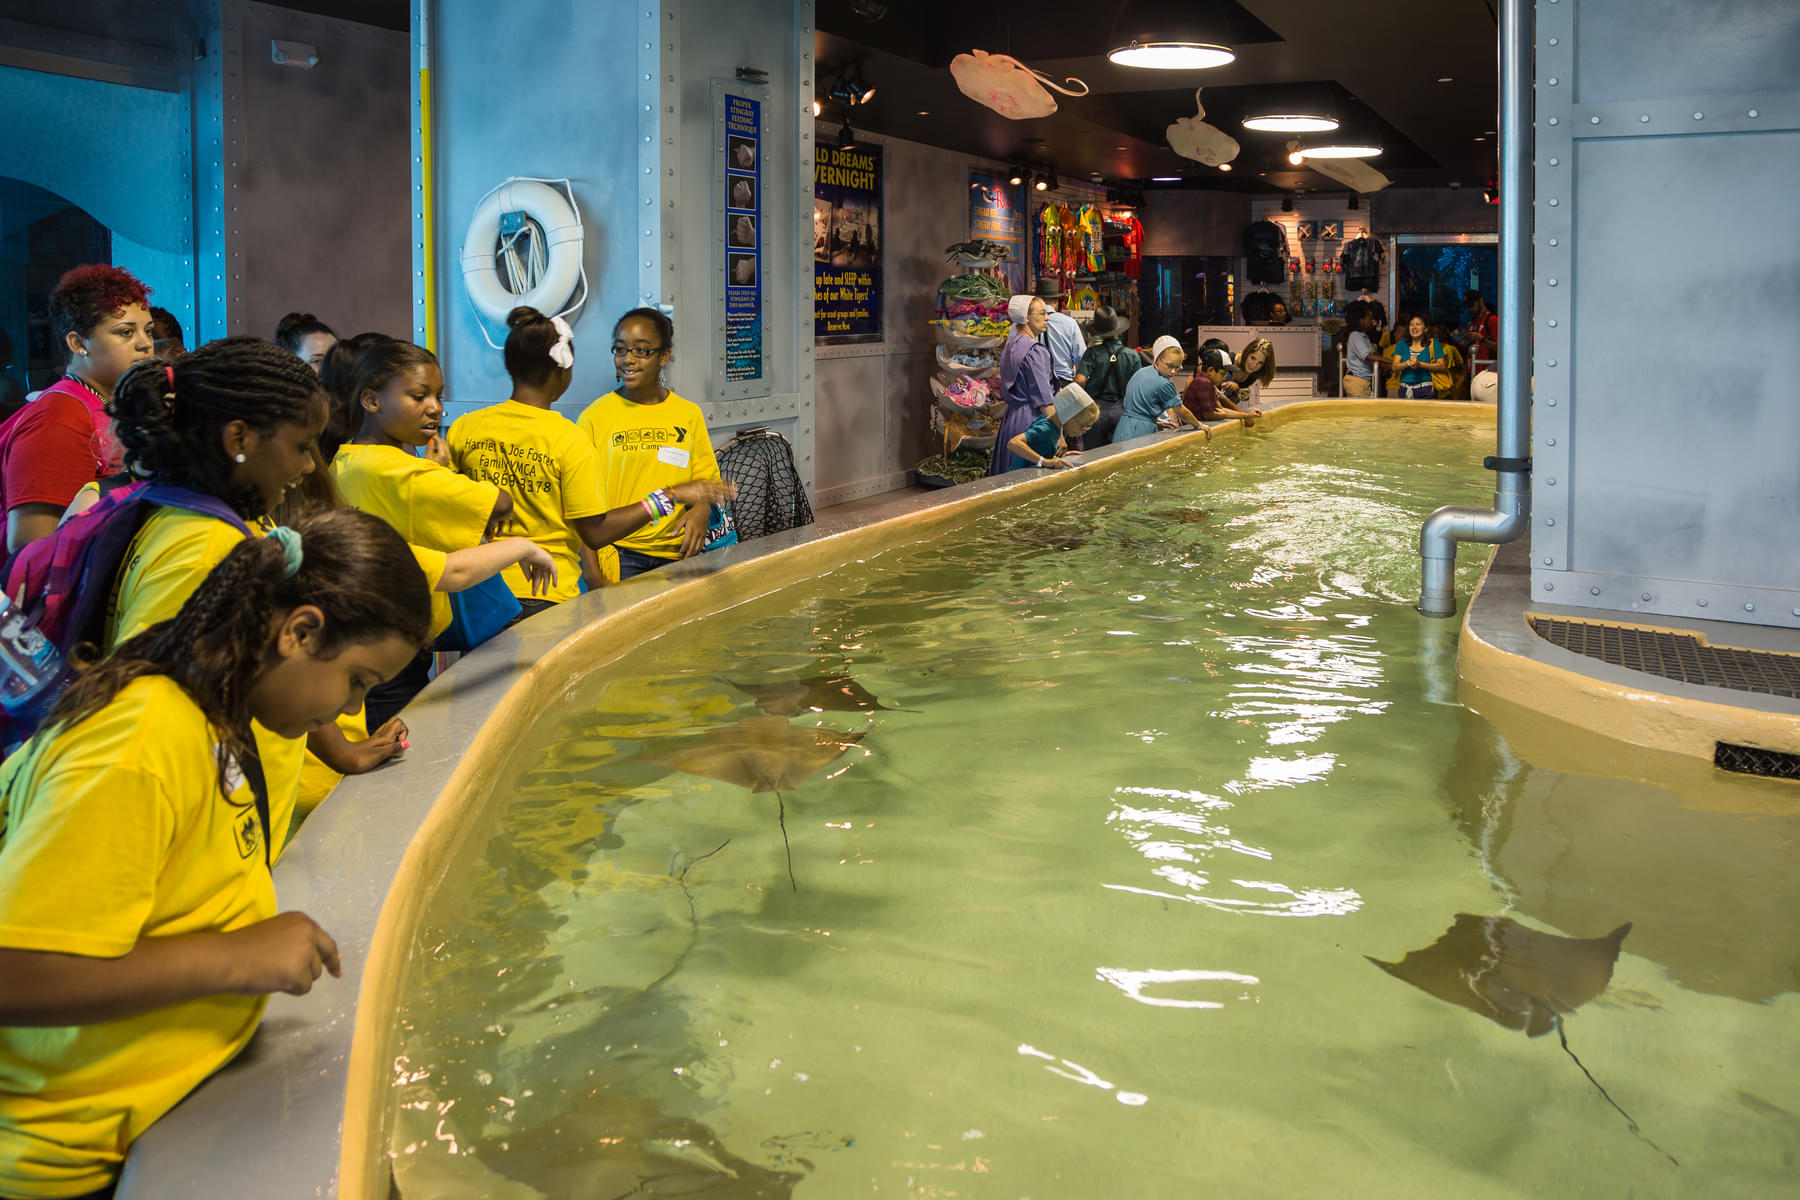 Interact with Stingray at the Stingray Reef 